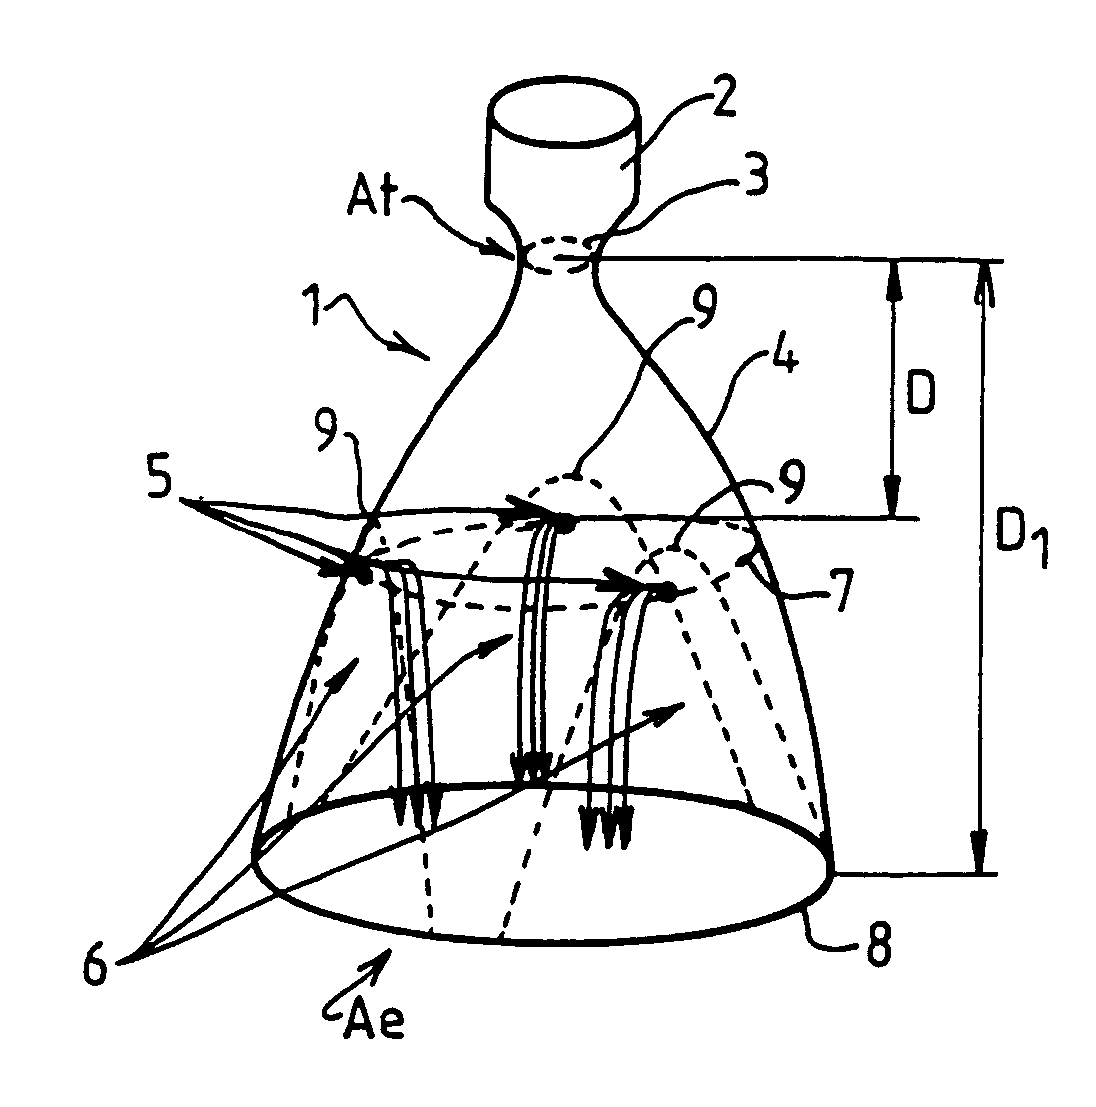 Method of achieving jet separation of an un-separated flow in a divergent nozzle body of a rocket engine